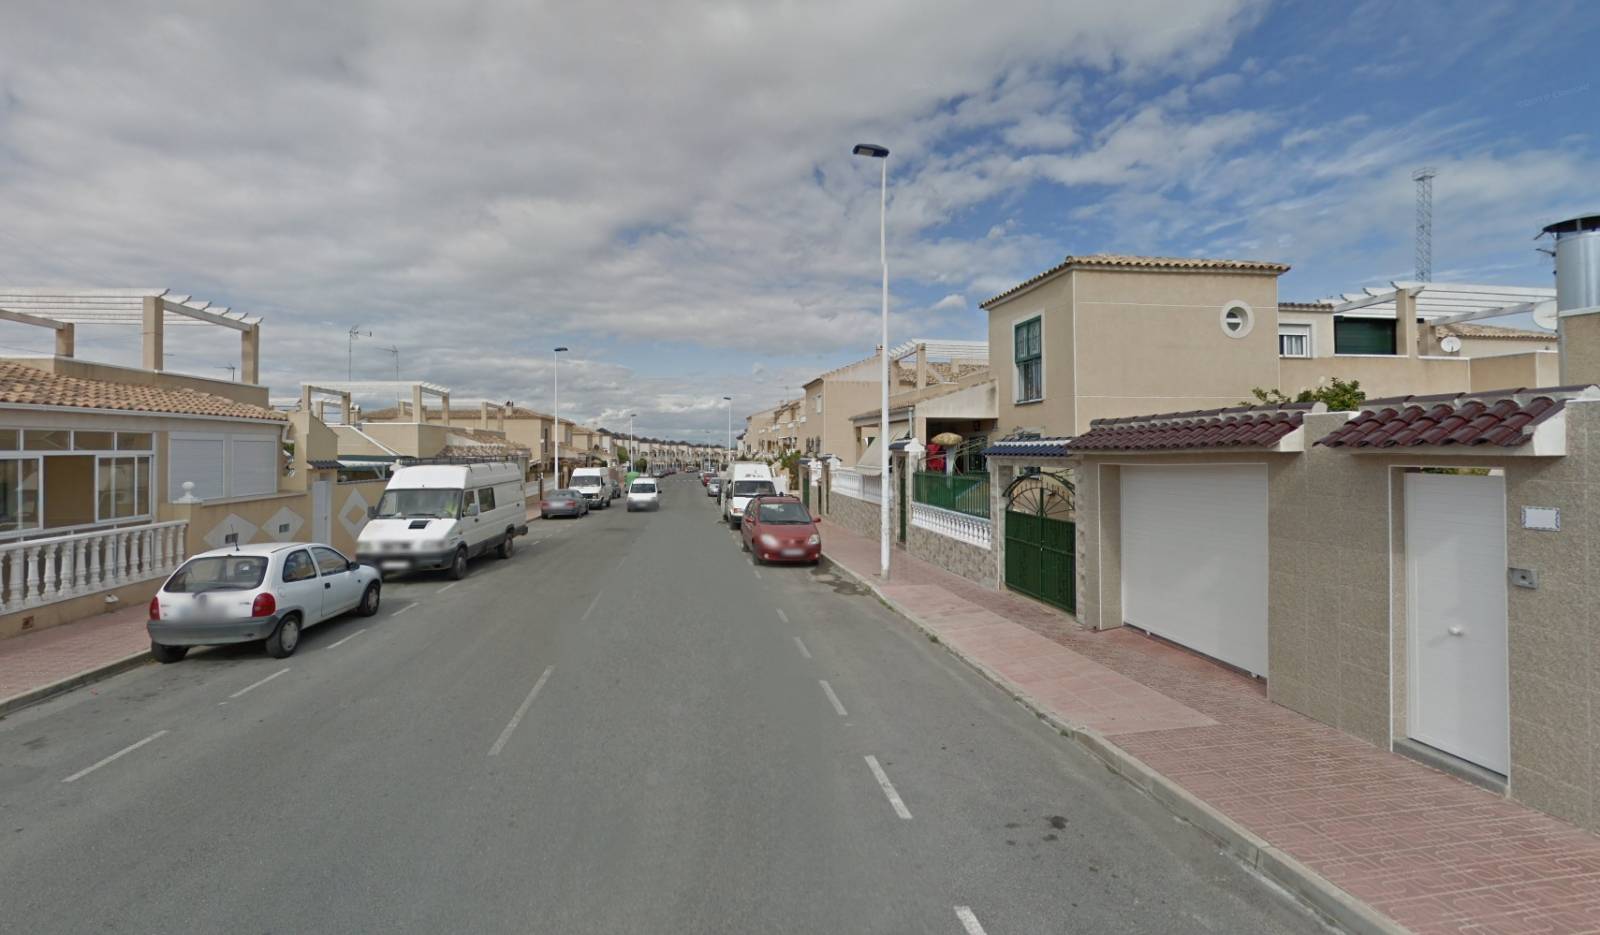 SEMI-DETACHED HOUSE IN THE CENTER OF TORREVIEJA WITH ENTRANCE FOR CAR